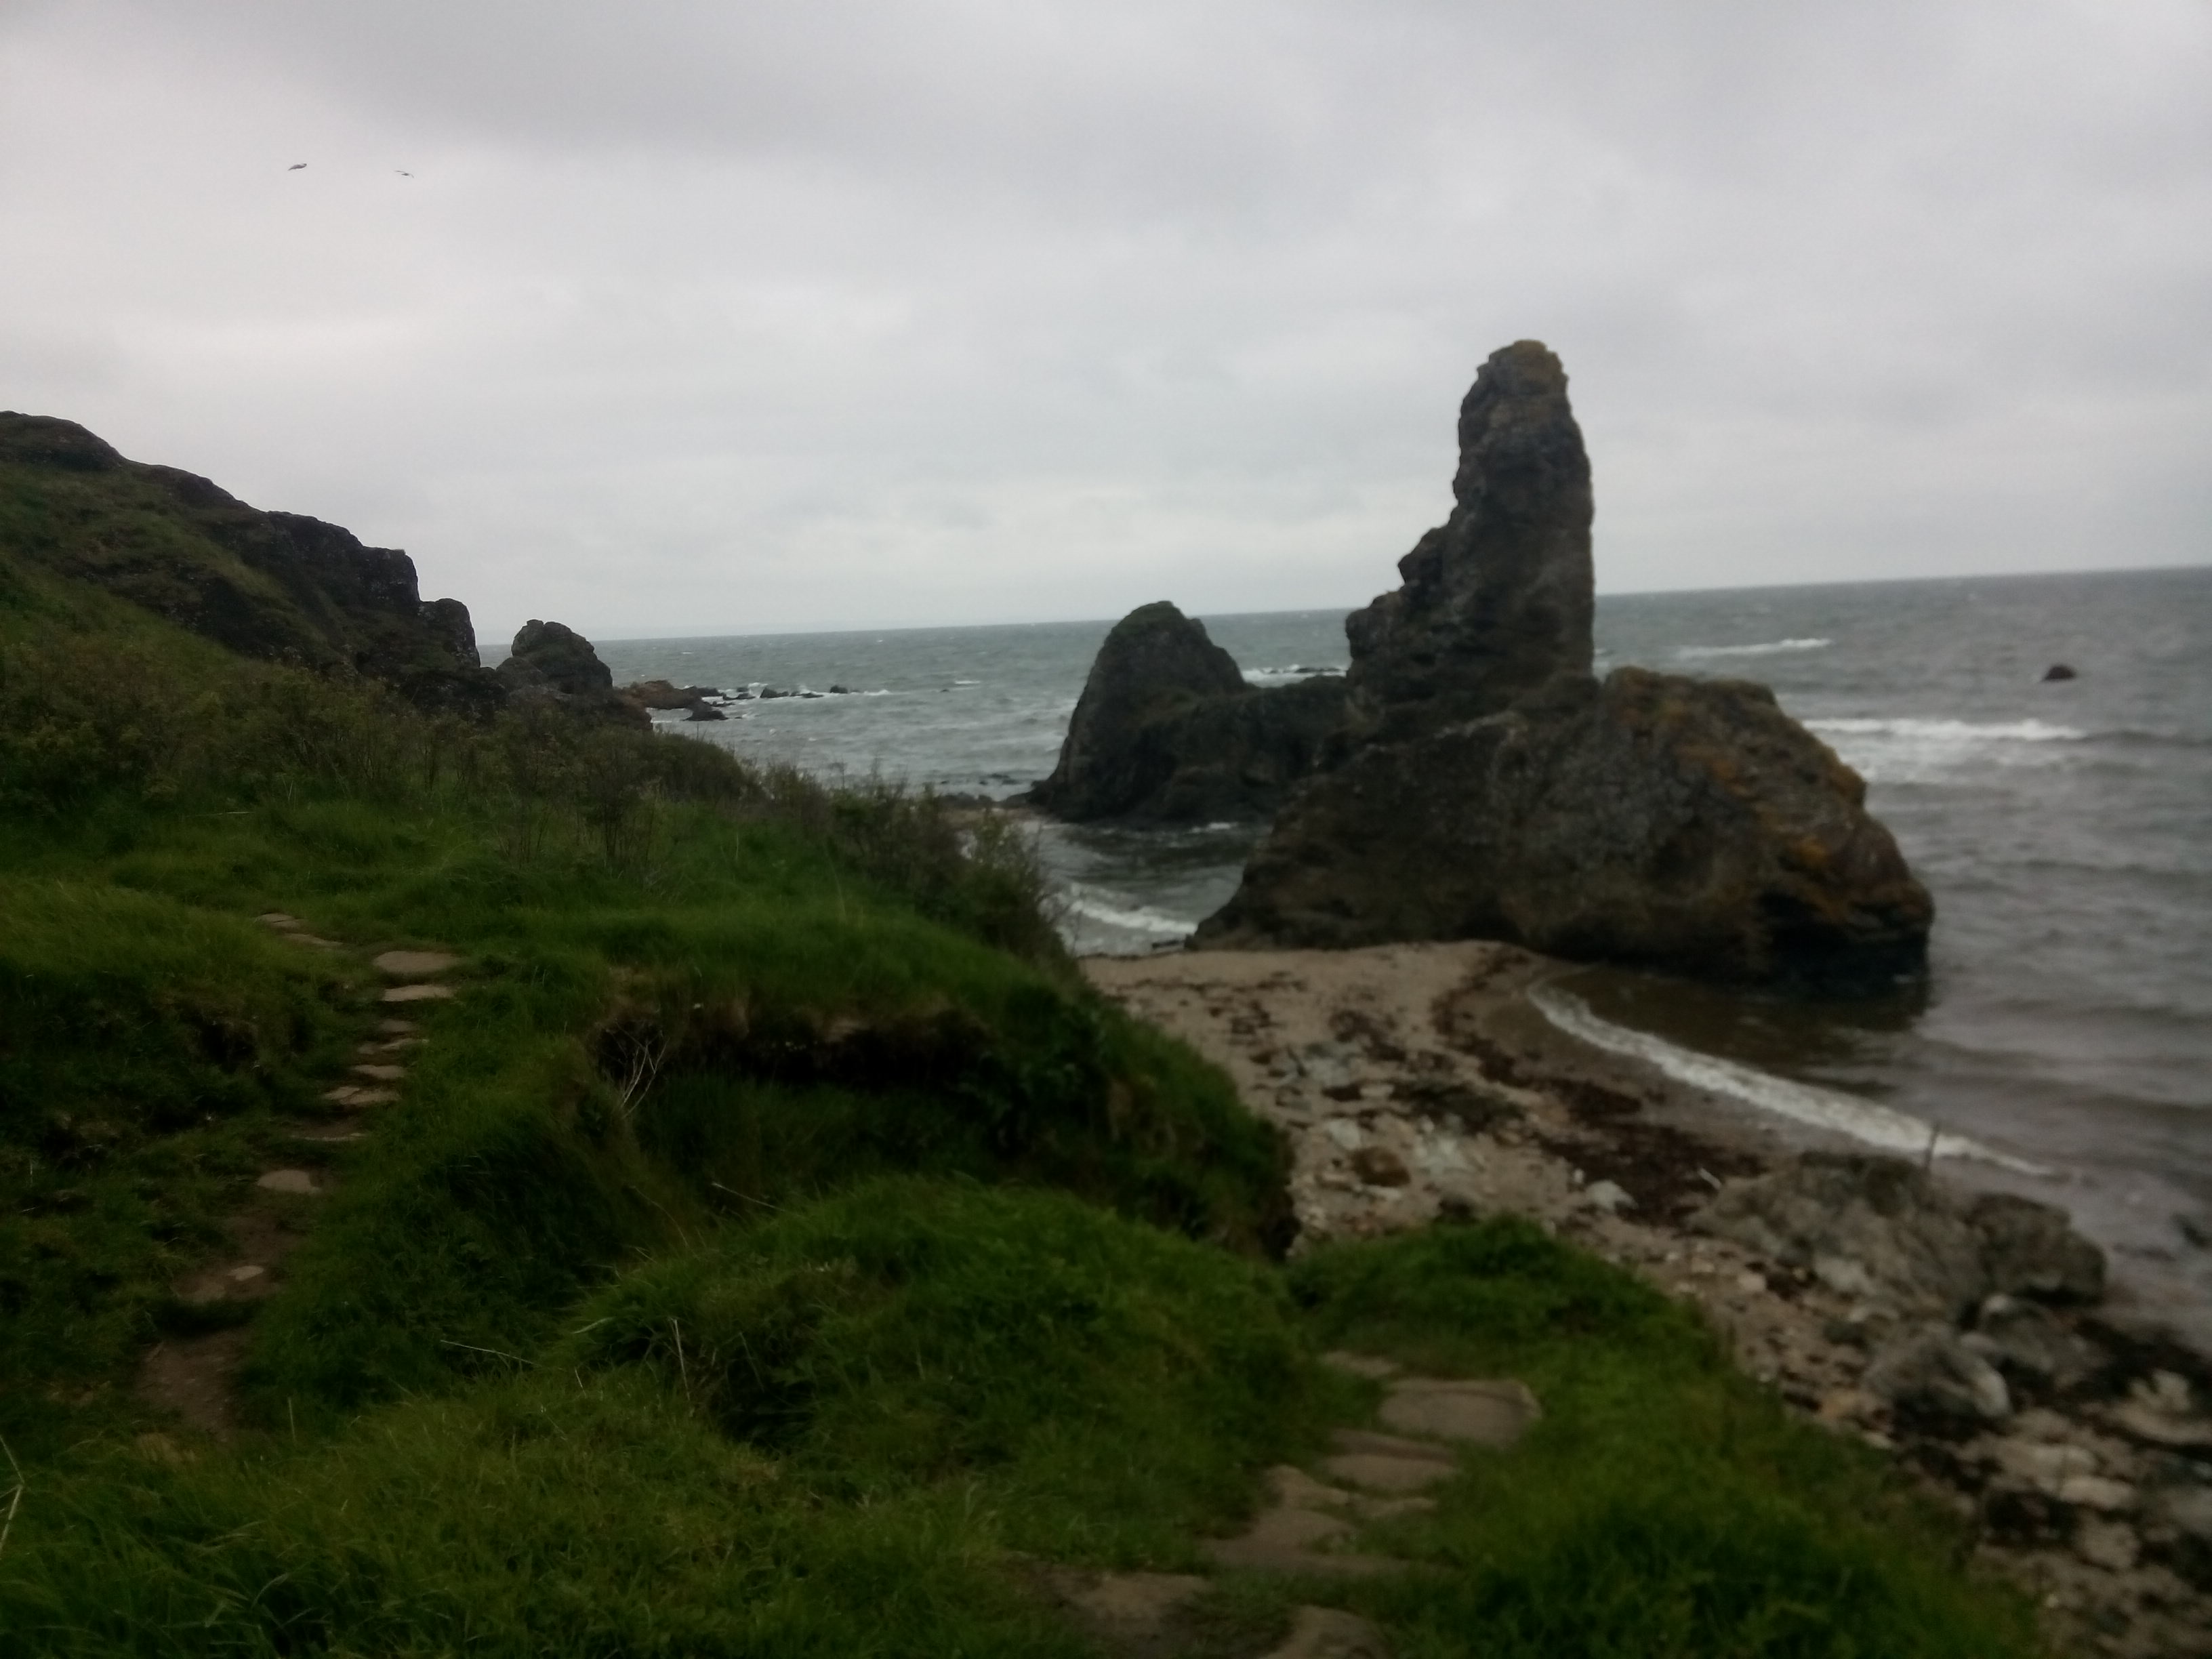 Narrow steps wind down through grass covered rocks with rock formations out to sea